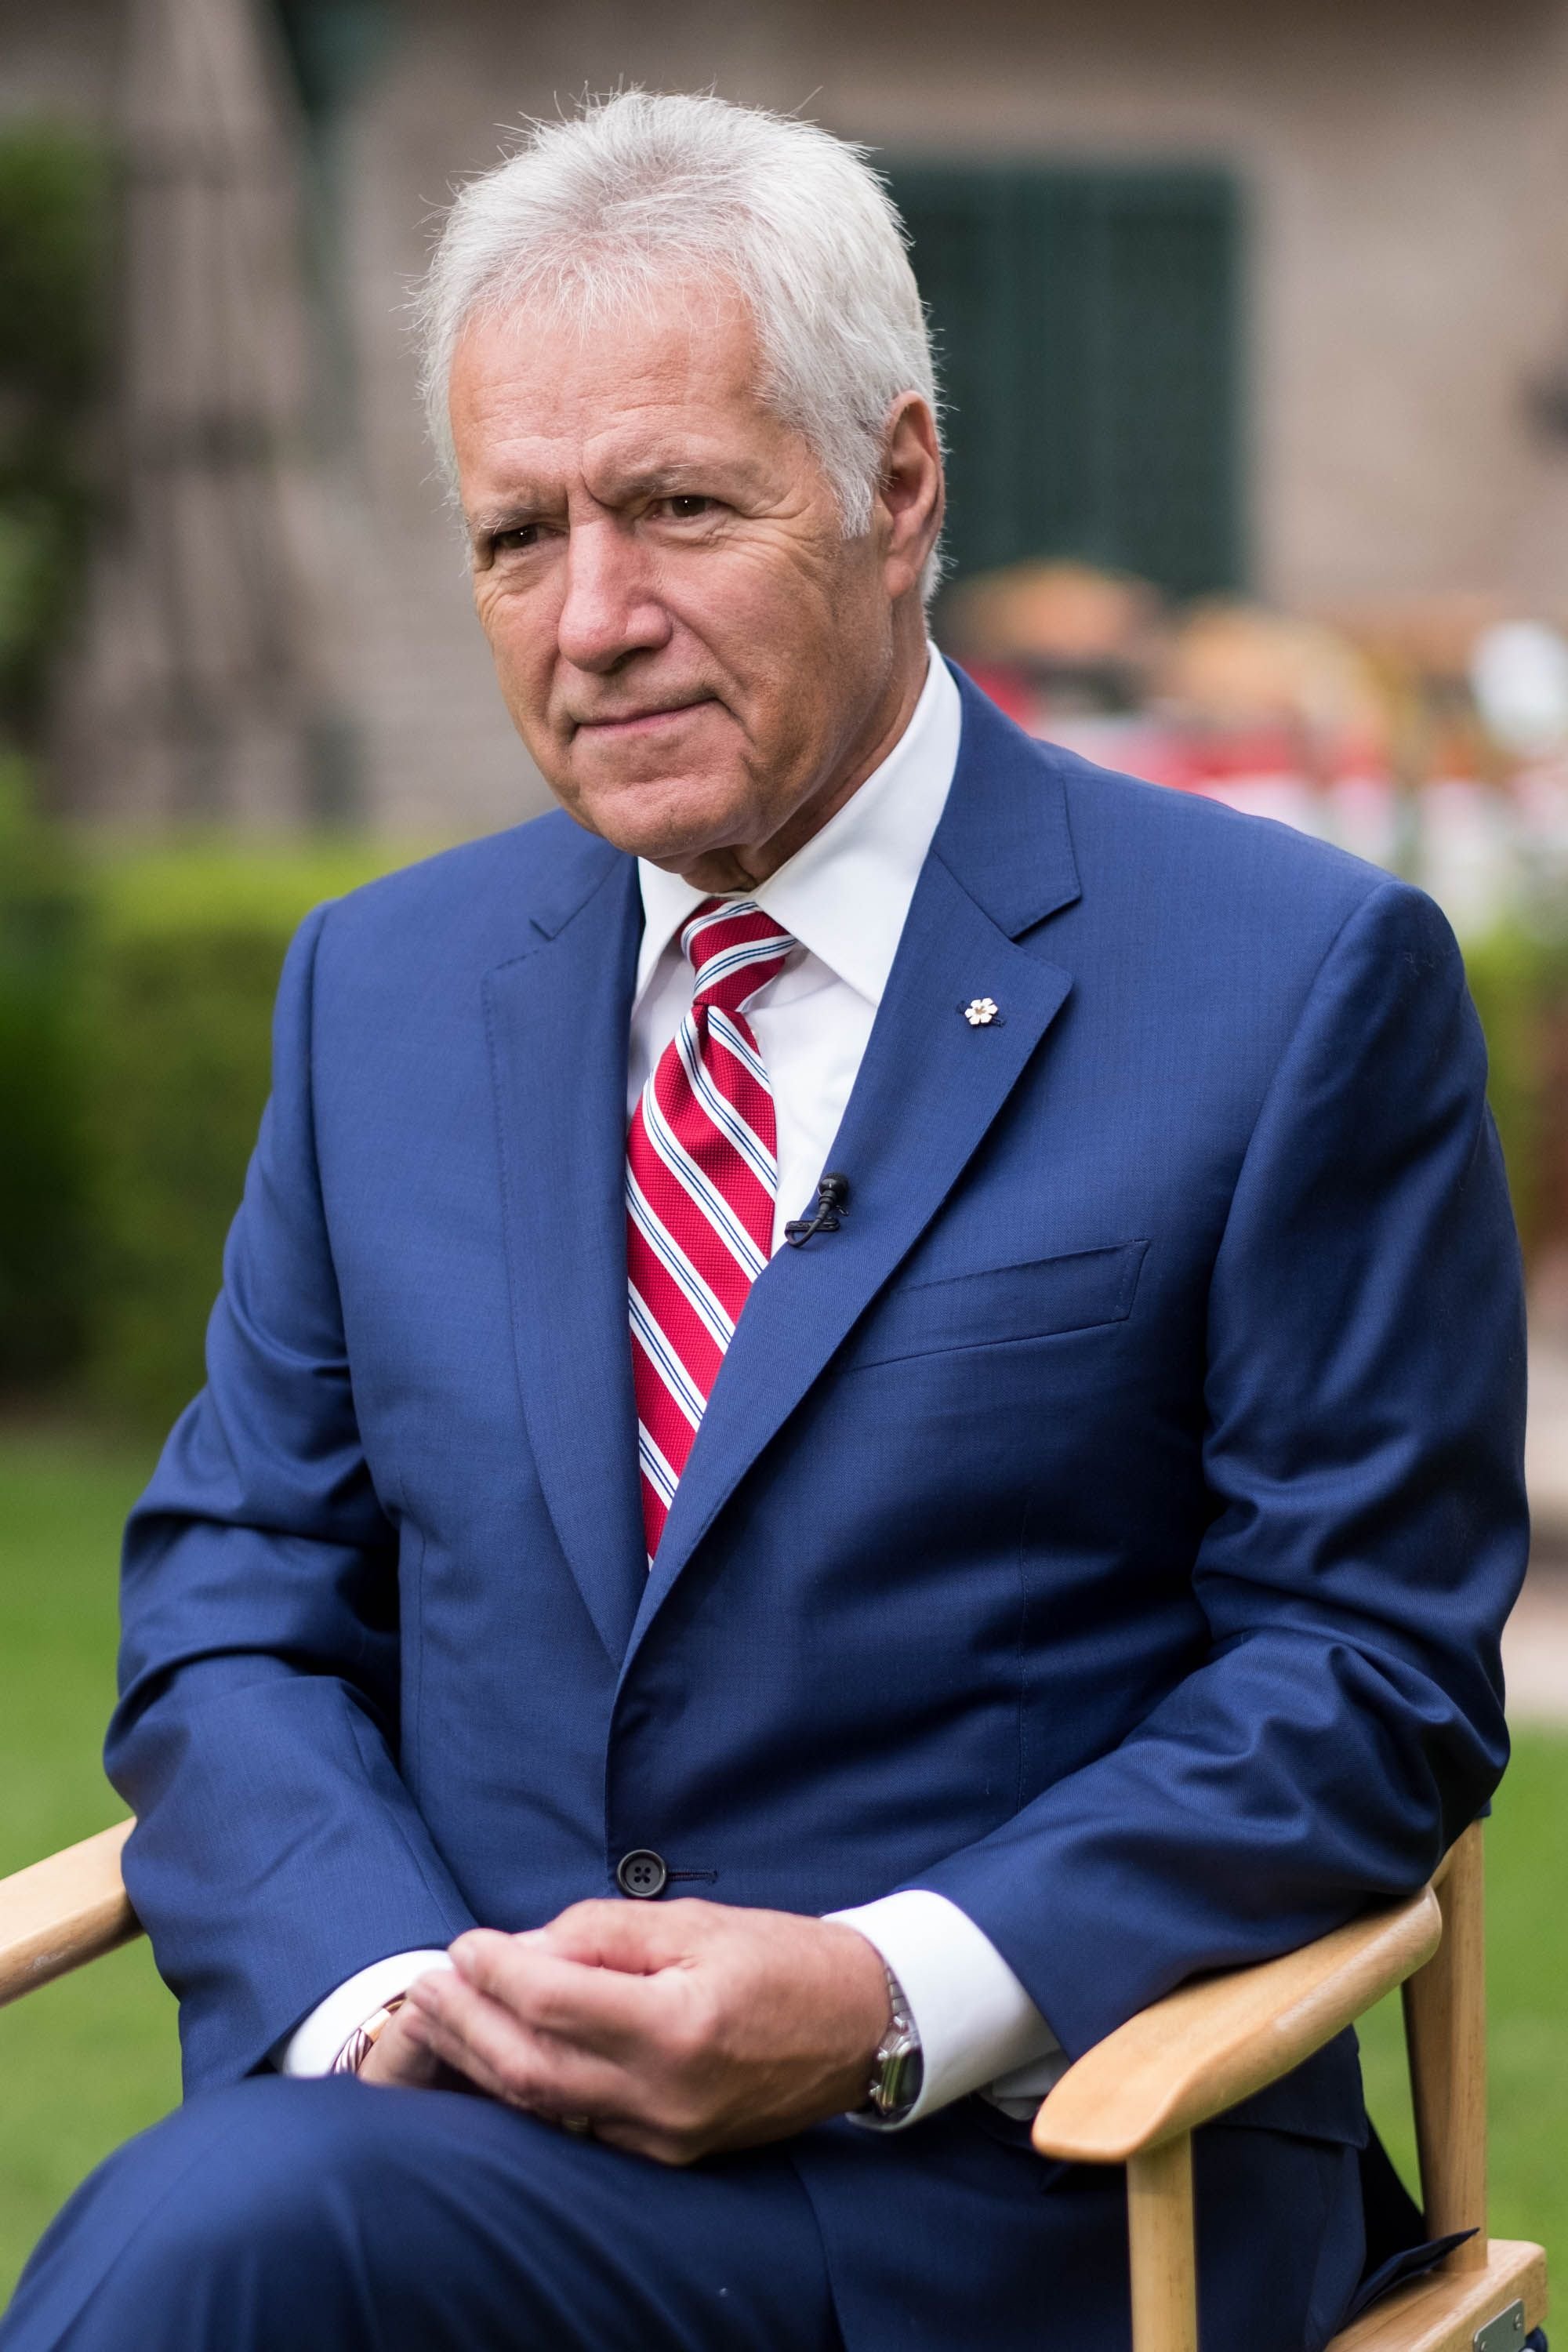 Alex Trebek at the 150th anniversary of Canada's Confederation at the Official Residence of Canada in Los Angeles, California | Photo: Emma McIntyre/Getty Images